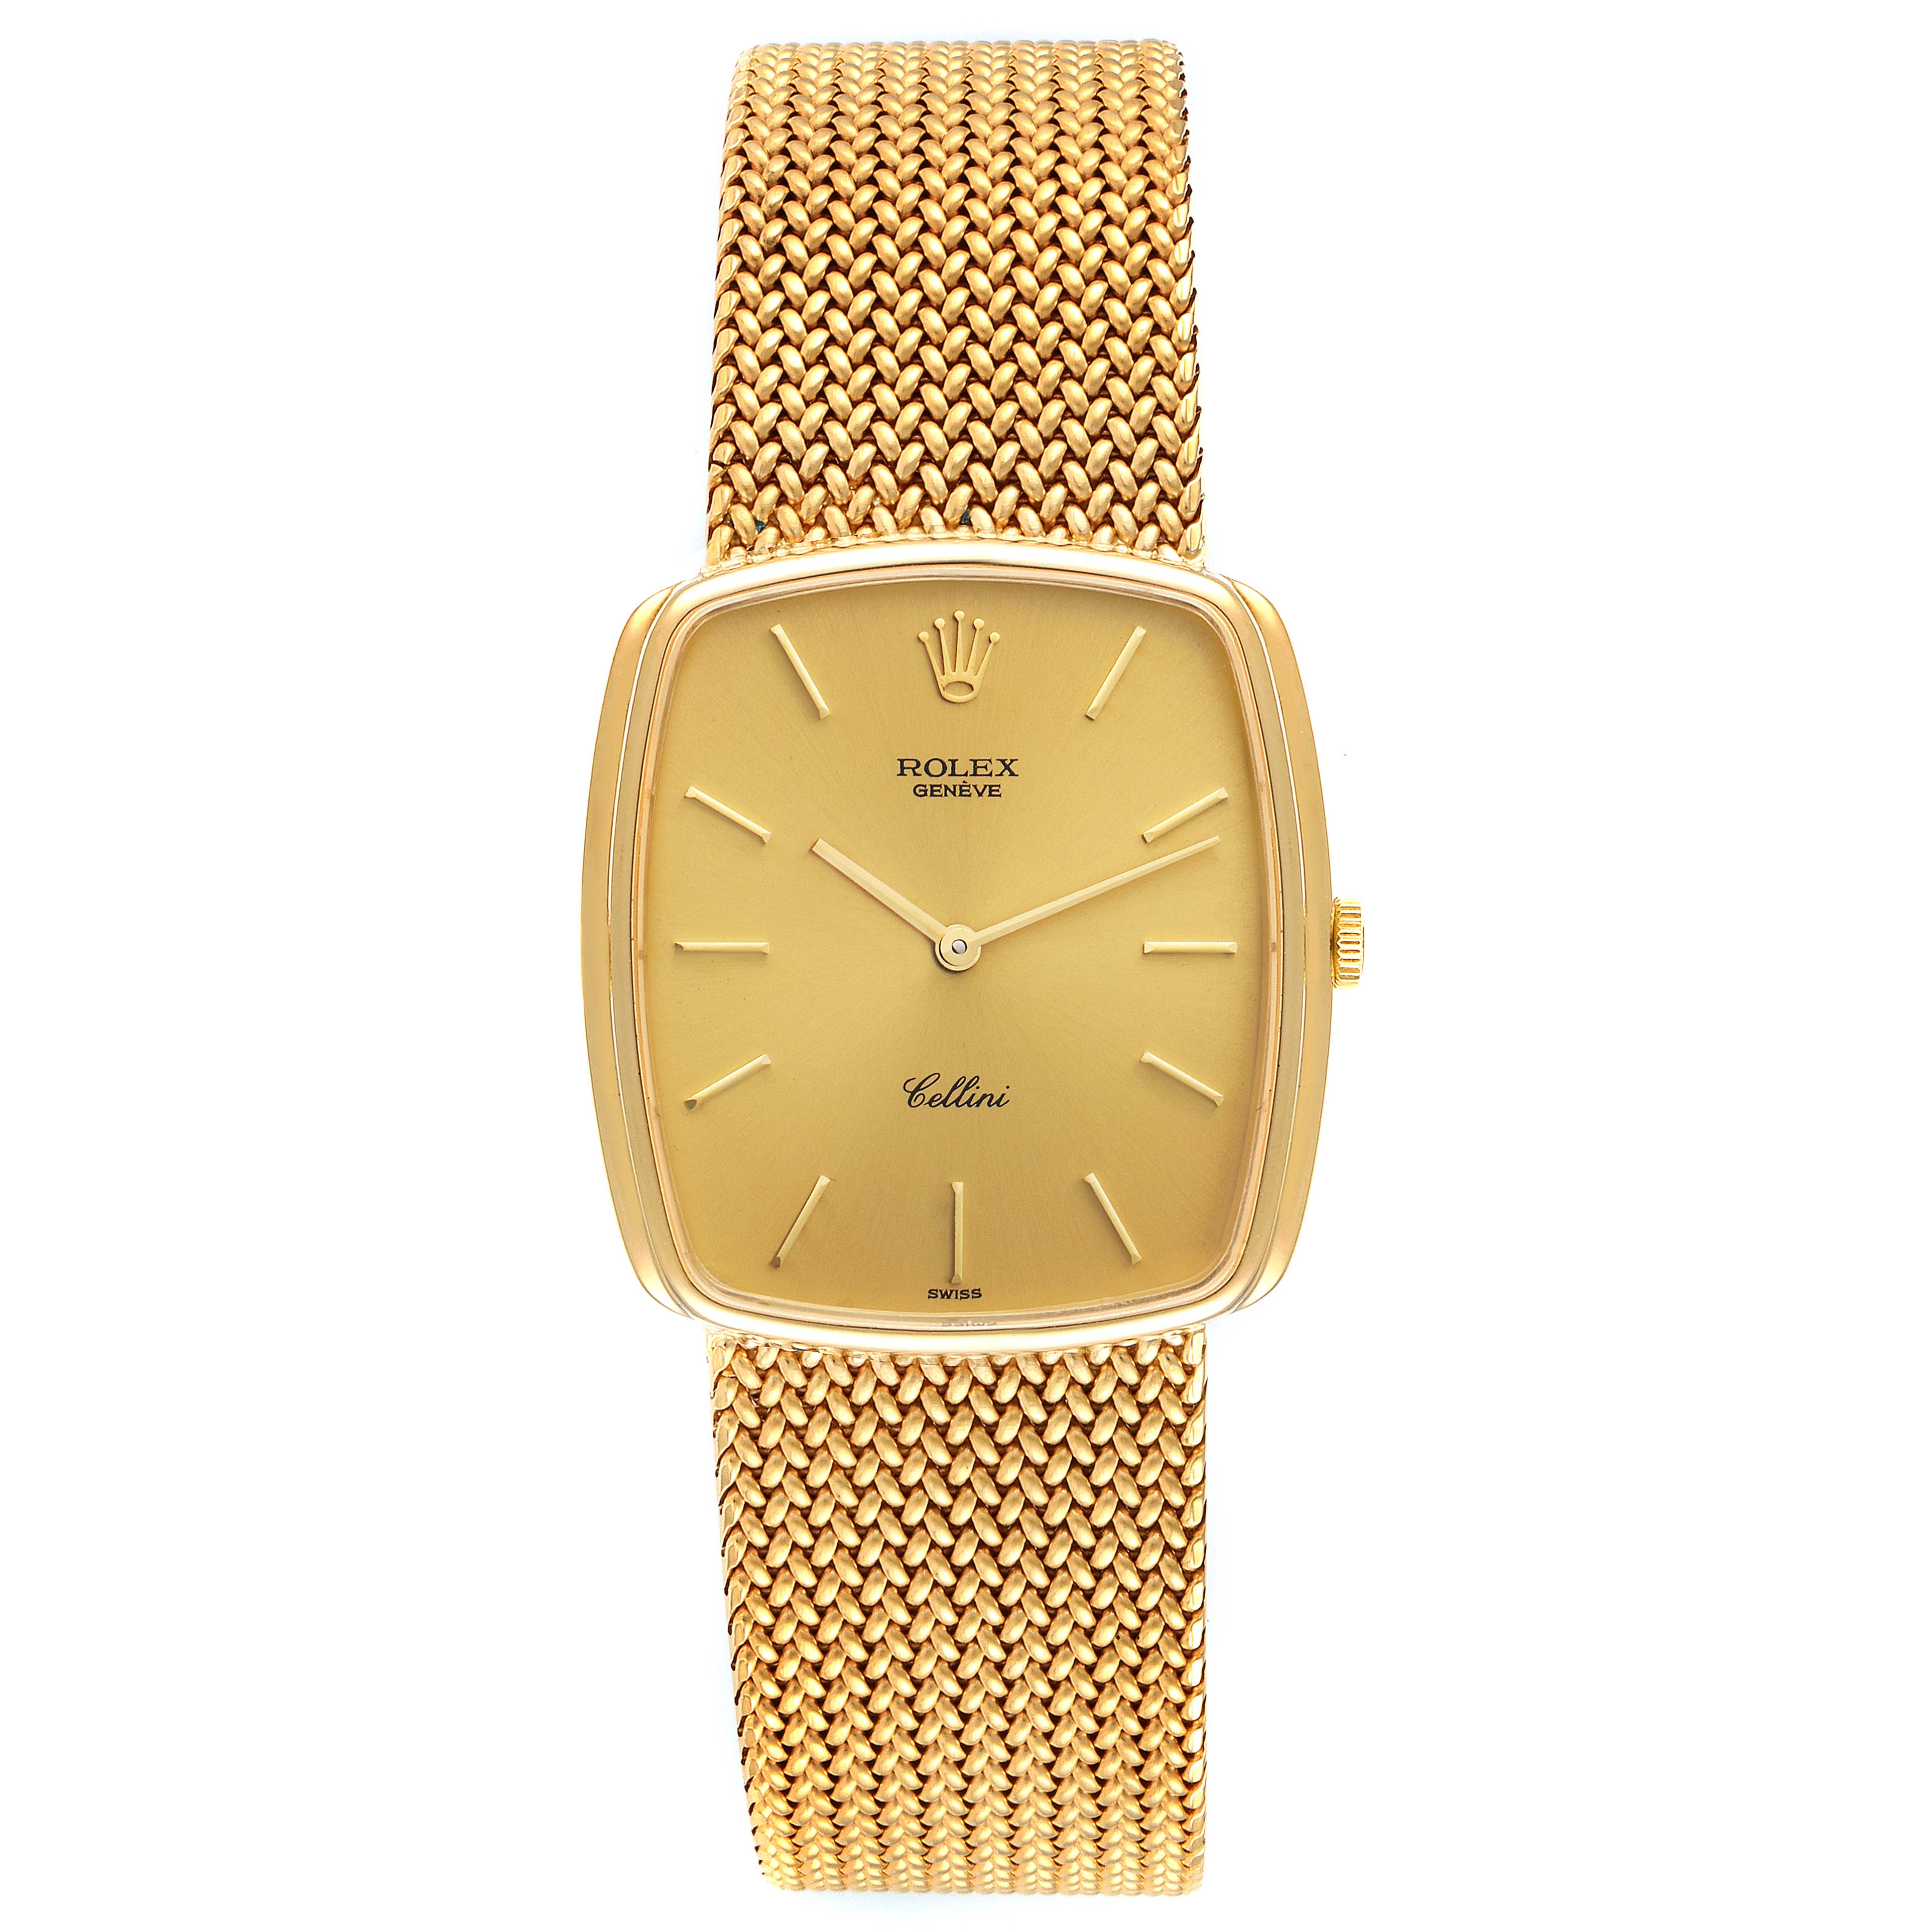 Rolex Cellini Vintage 18k Yellow Gold Champagne Dial Mens Watch 4086 ...